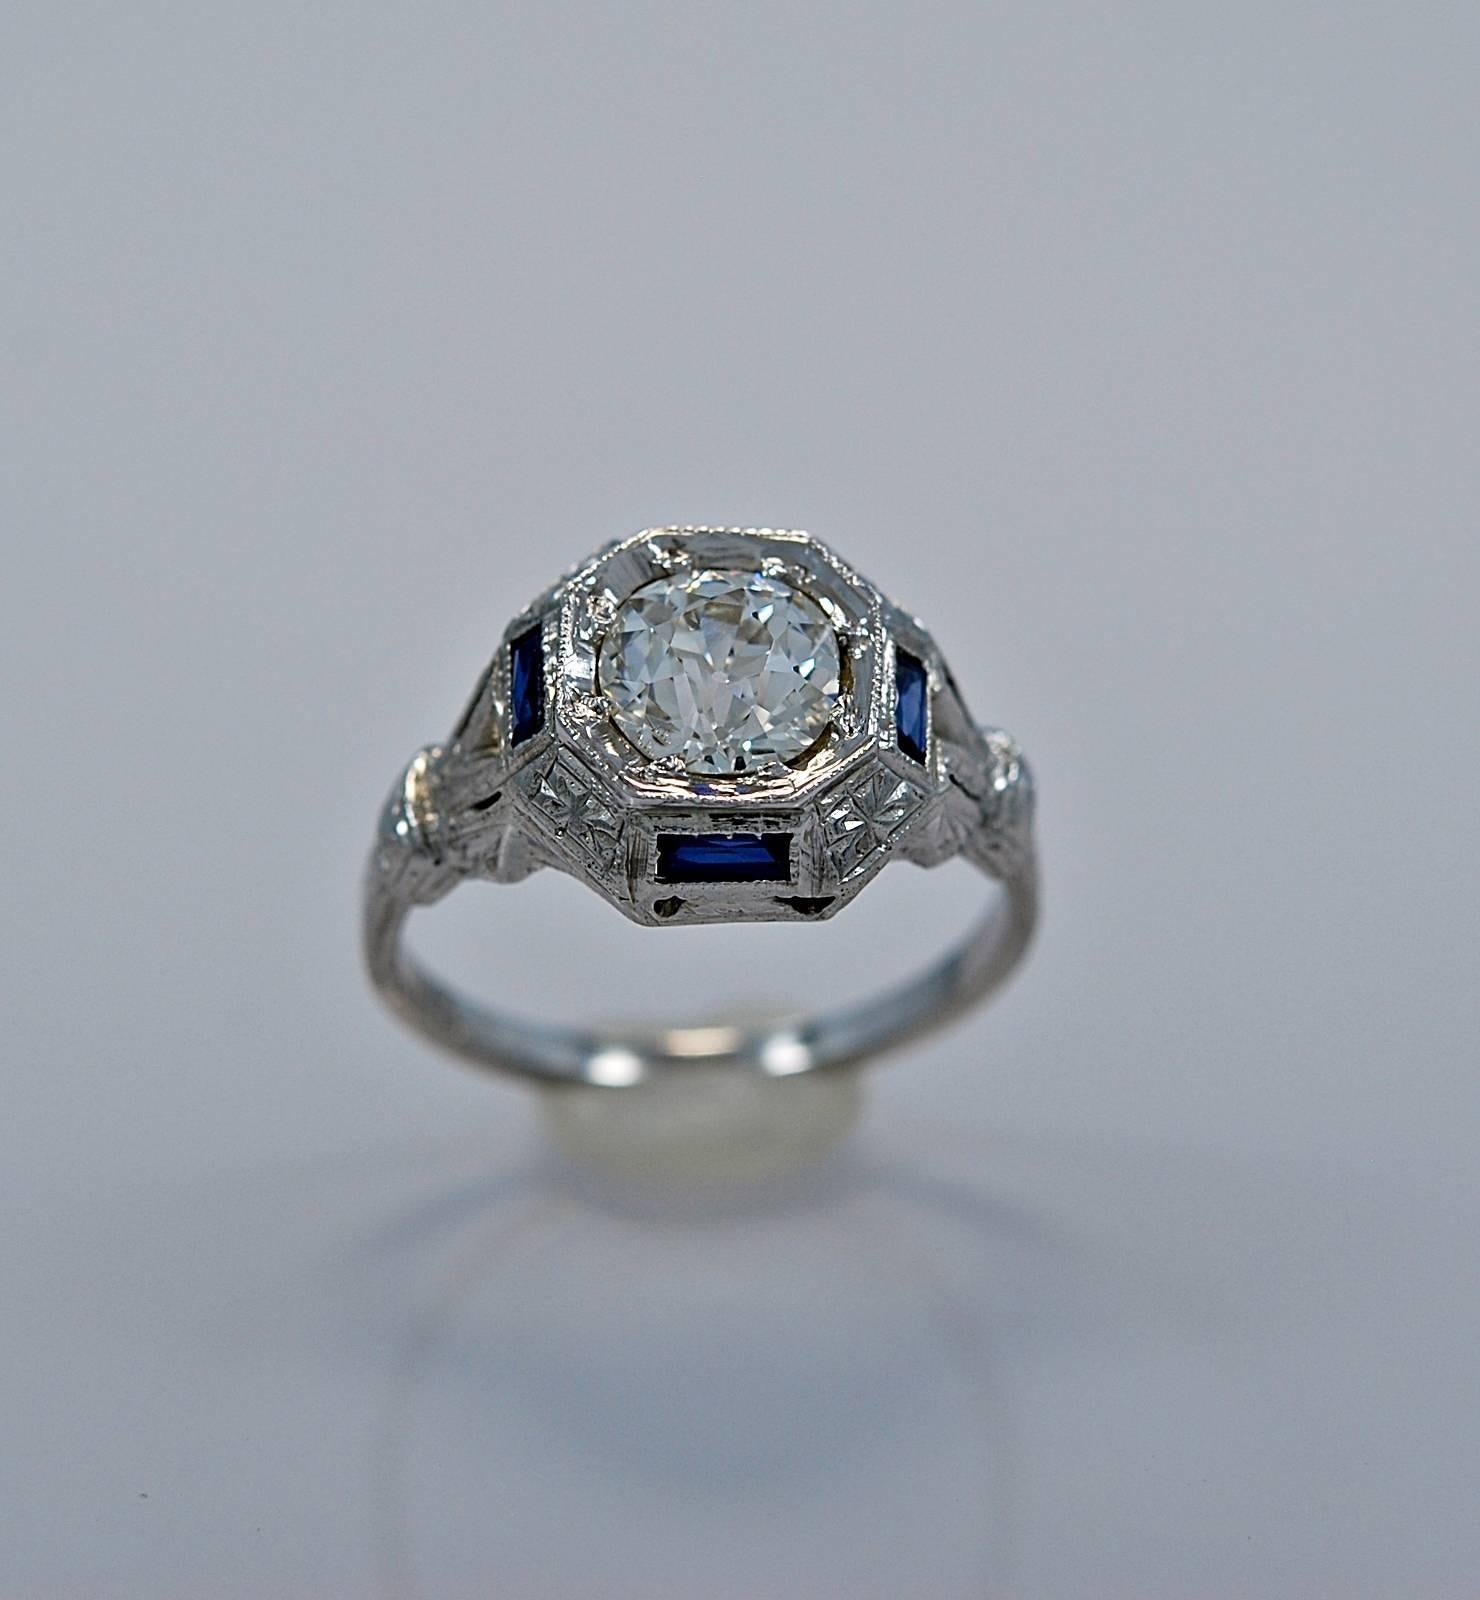 An Art Deco 18K white gold & diamond engagement ring featuring a 1.00ct. apx. diamond of VS1 clarity and J color. Four synthetic sapphires (consistent with the time period) accent the center diamond on each side of the head. This ring is beautifully